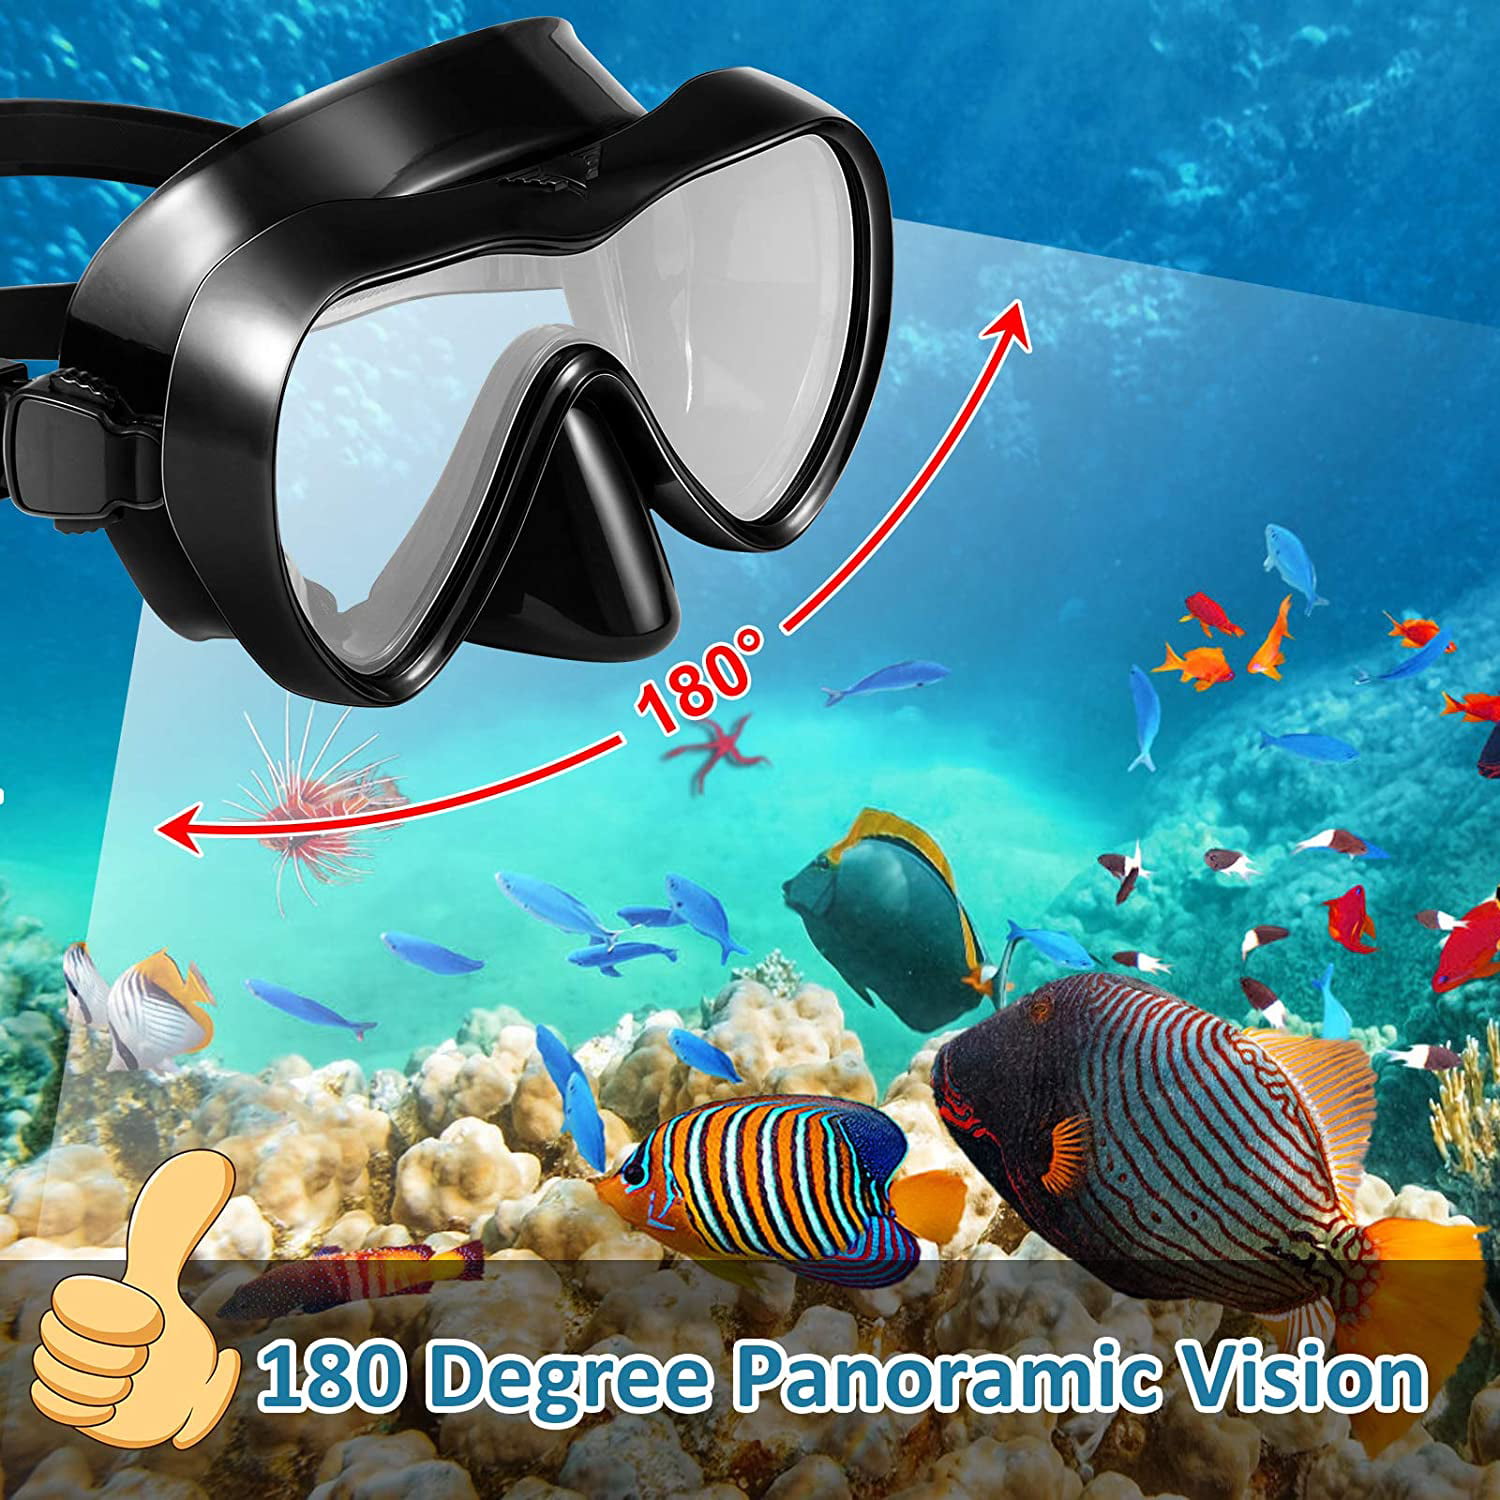 ZMteam Snorkel Set Snorkeling Gear Adults,Dry Top Diving Masks and Snorkel for Man Women Swimming Easy-Breath Scuba Gear with Anti-Leak Anti-Fog Tempered Panoramic Glass for Diving 